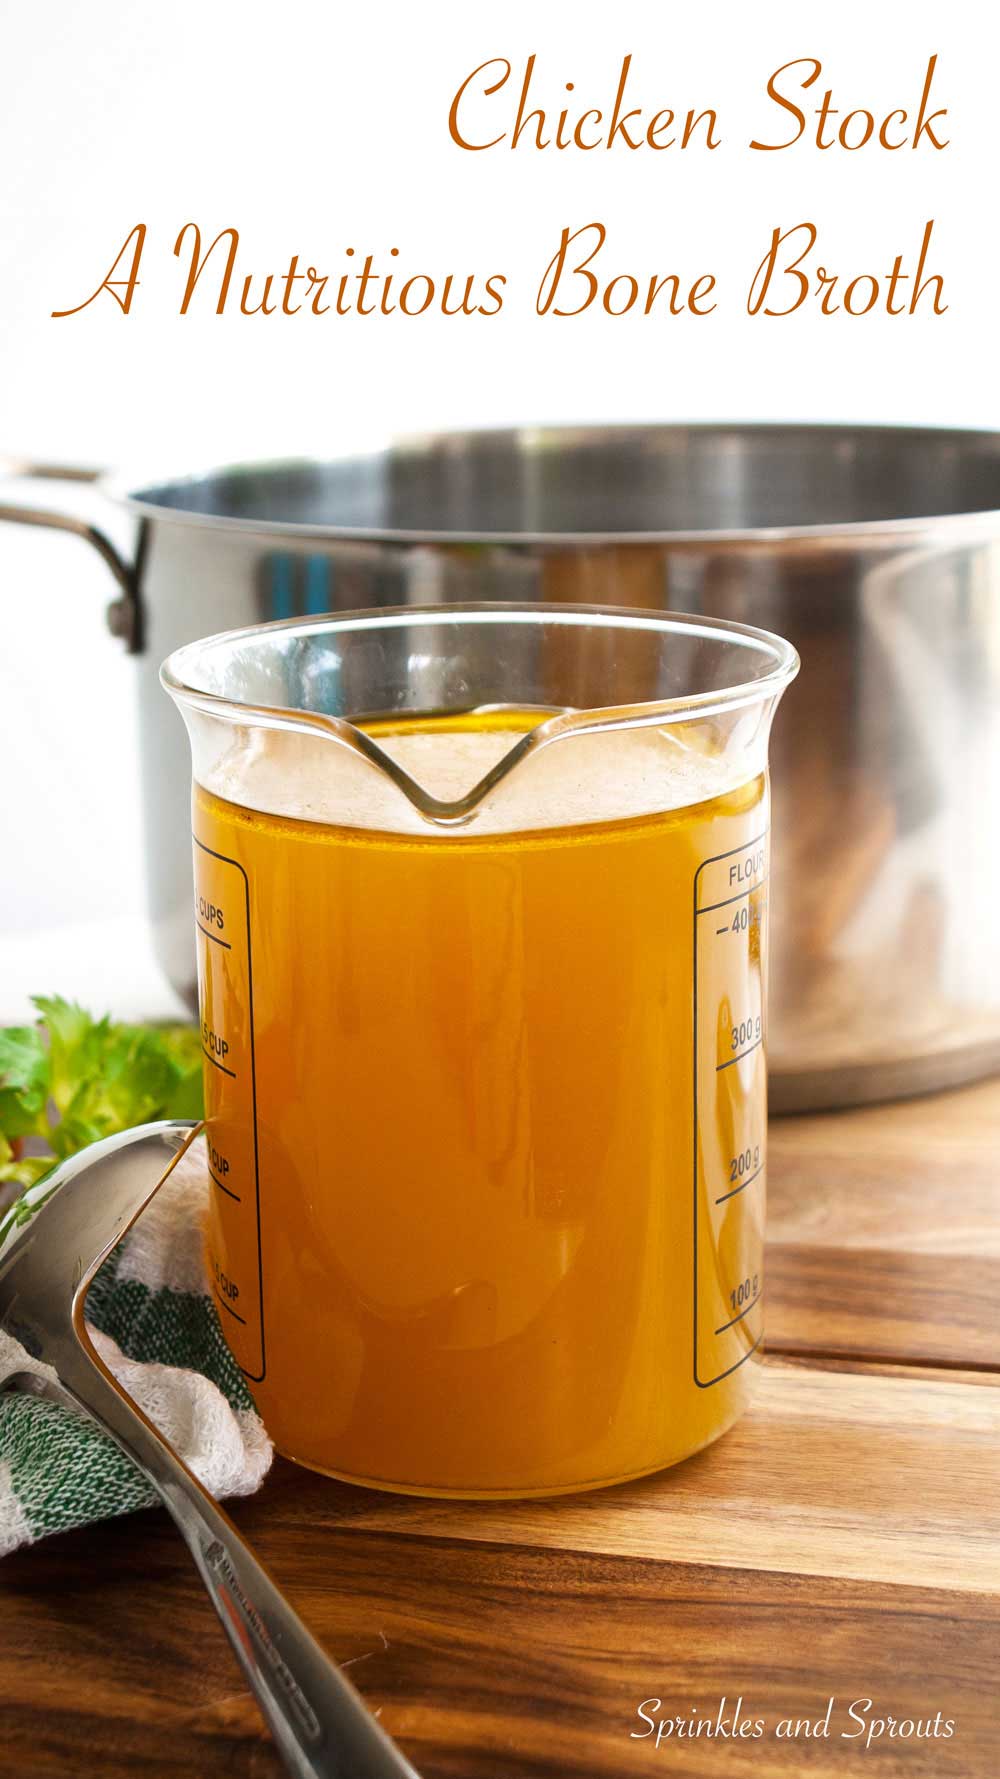 Chicken Stock - A homemade recipe for a rich, delicious and nutritious bone broth. Perfect for making chicken soup or adding to risotto.